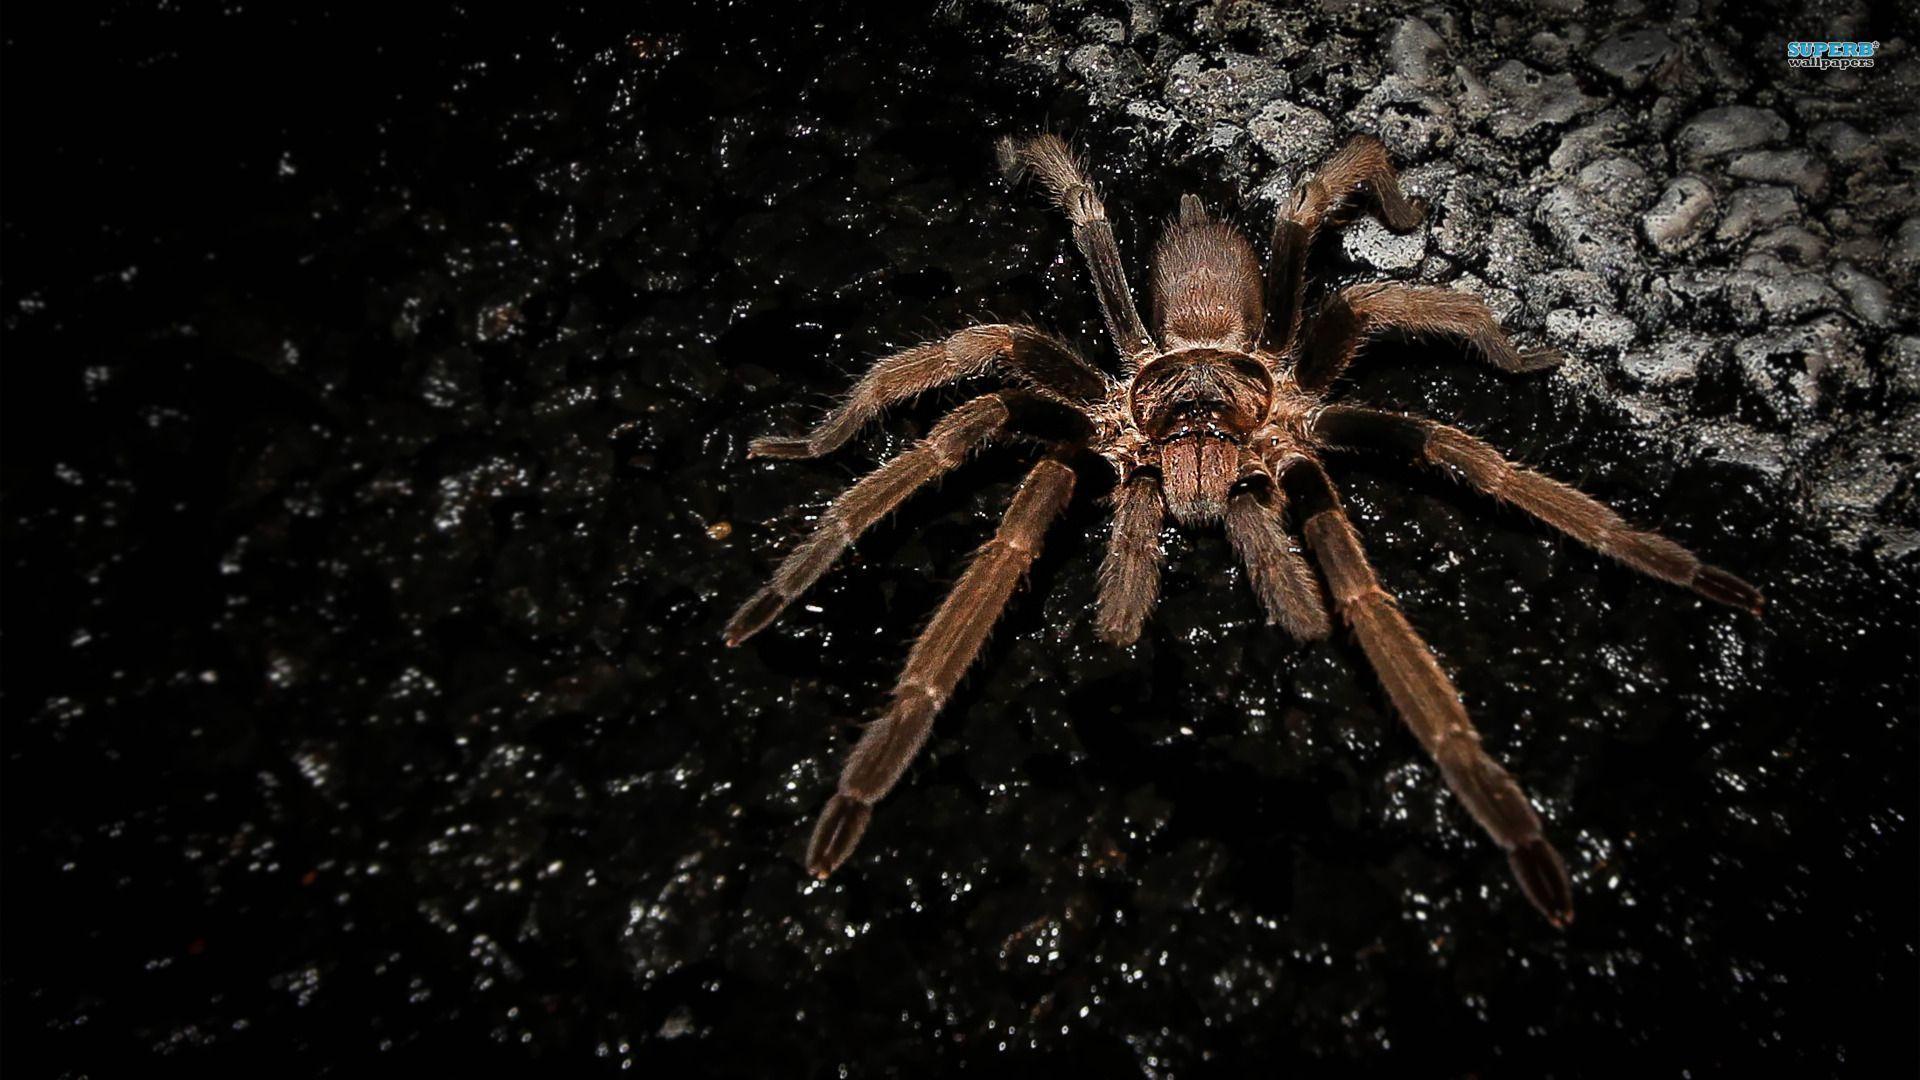 Spider Hd Wallpapers For Pc, Spider, Animal